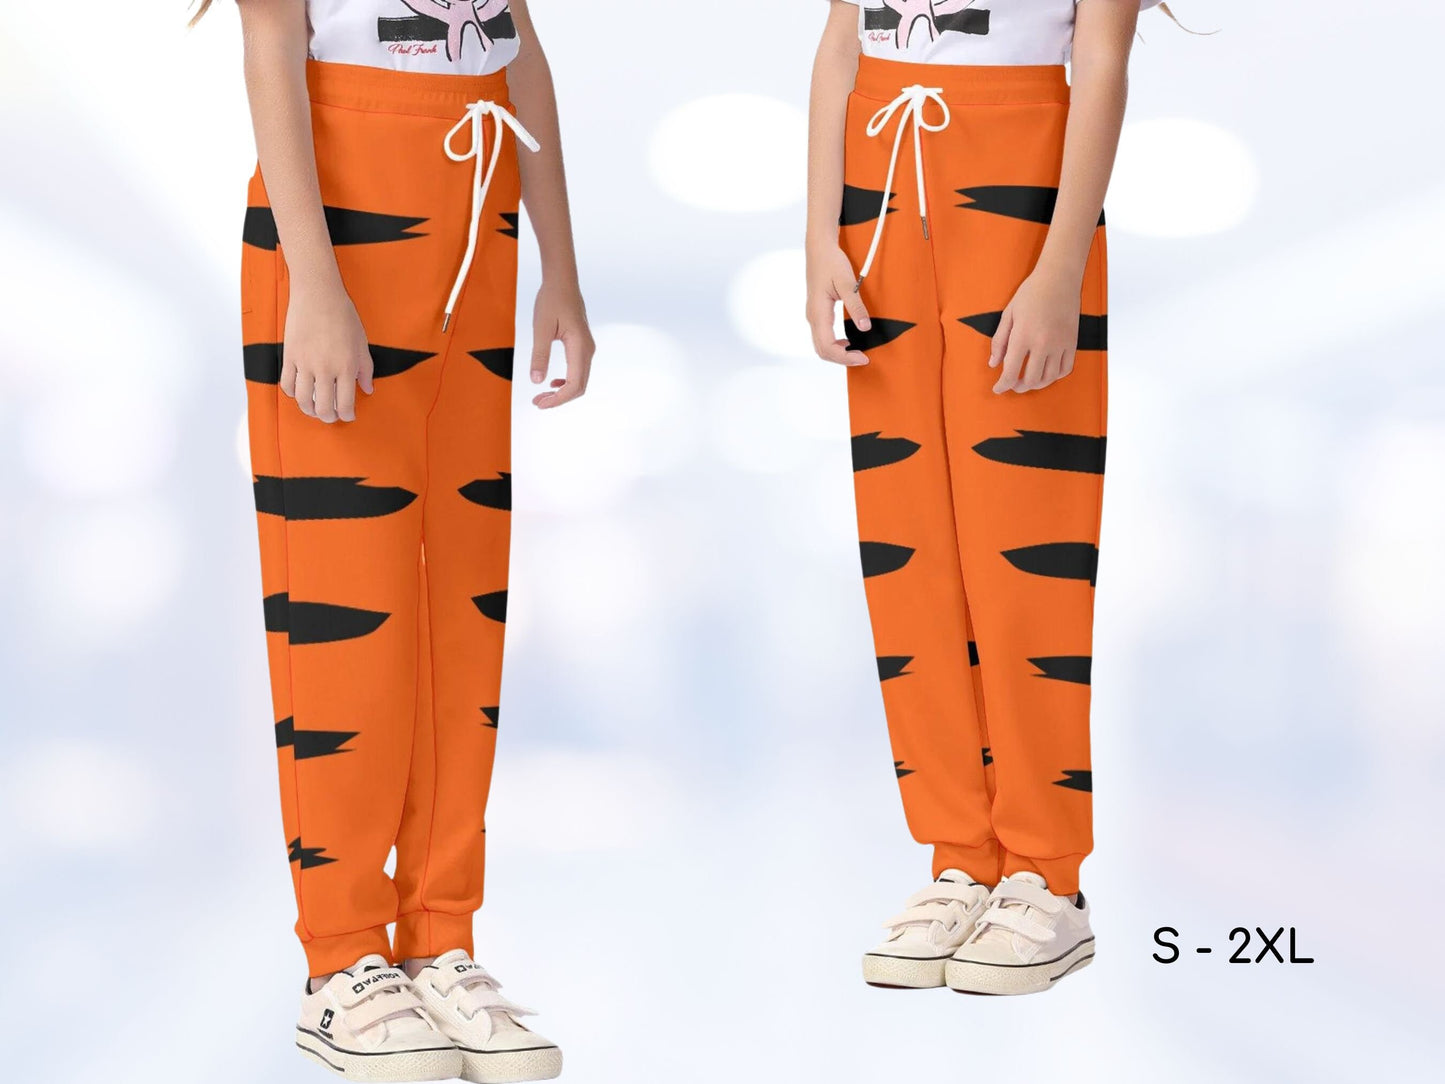 Winnie the Pooh Vintage Style Tigger Set Kids, Hoodie with Ears, Leggings Sweatpants, Gift for Her, Gift for Him, Halloween Costumes Cosplay